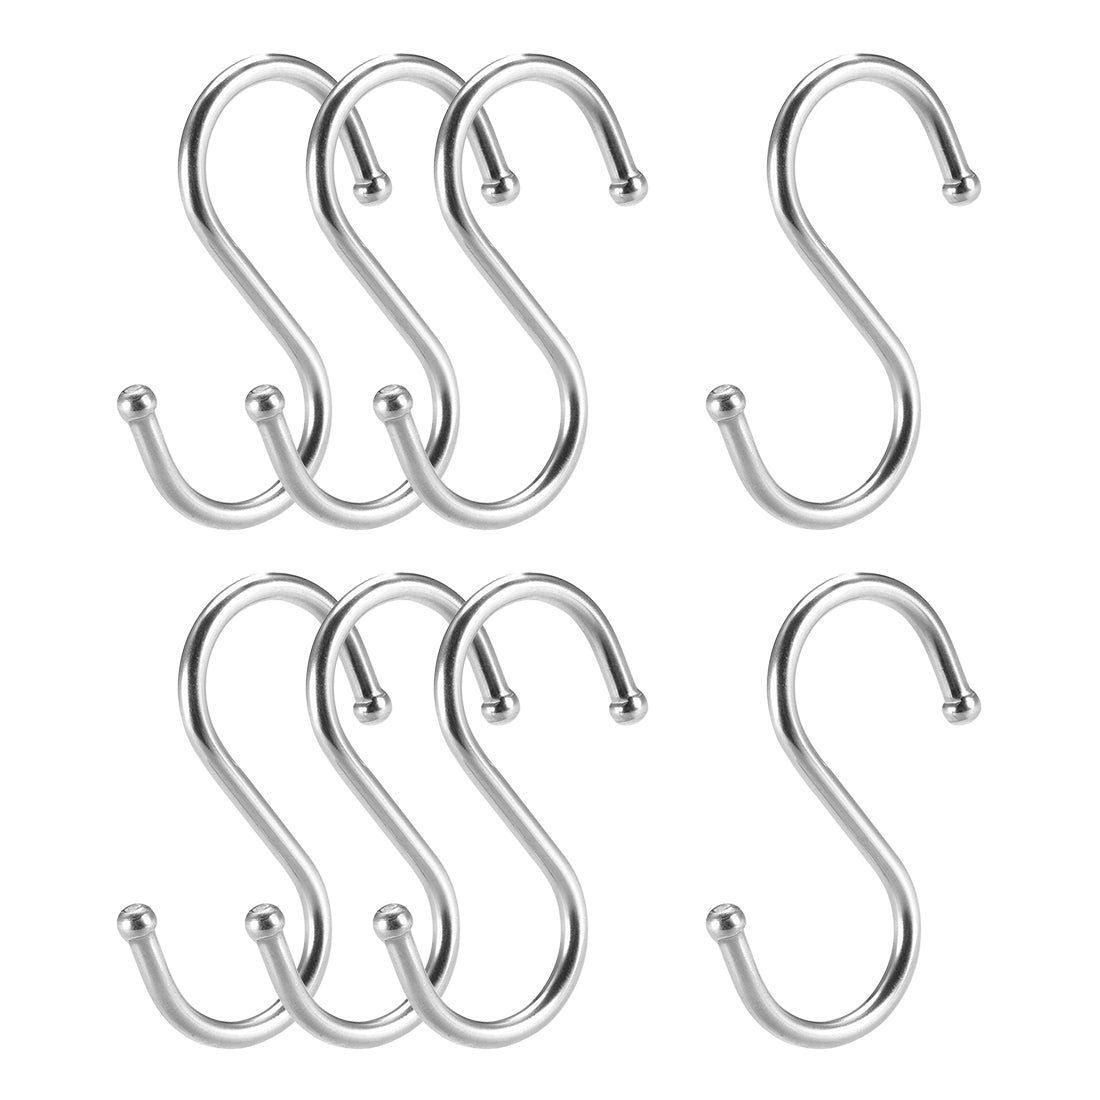 uxcell Uxcell Stainless Steel S Hooks 2.6" S Shaped Hook Hangers 8pcs